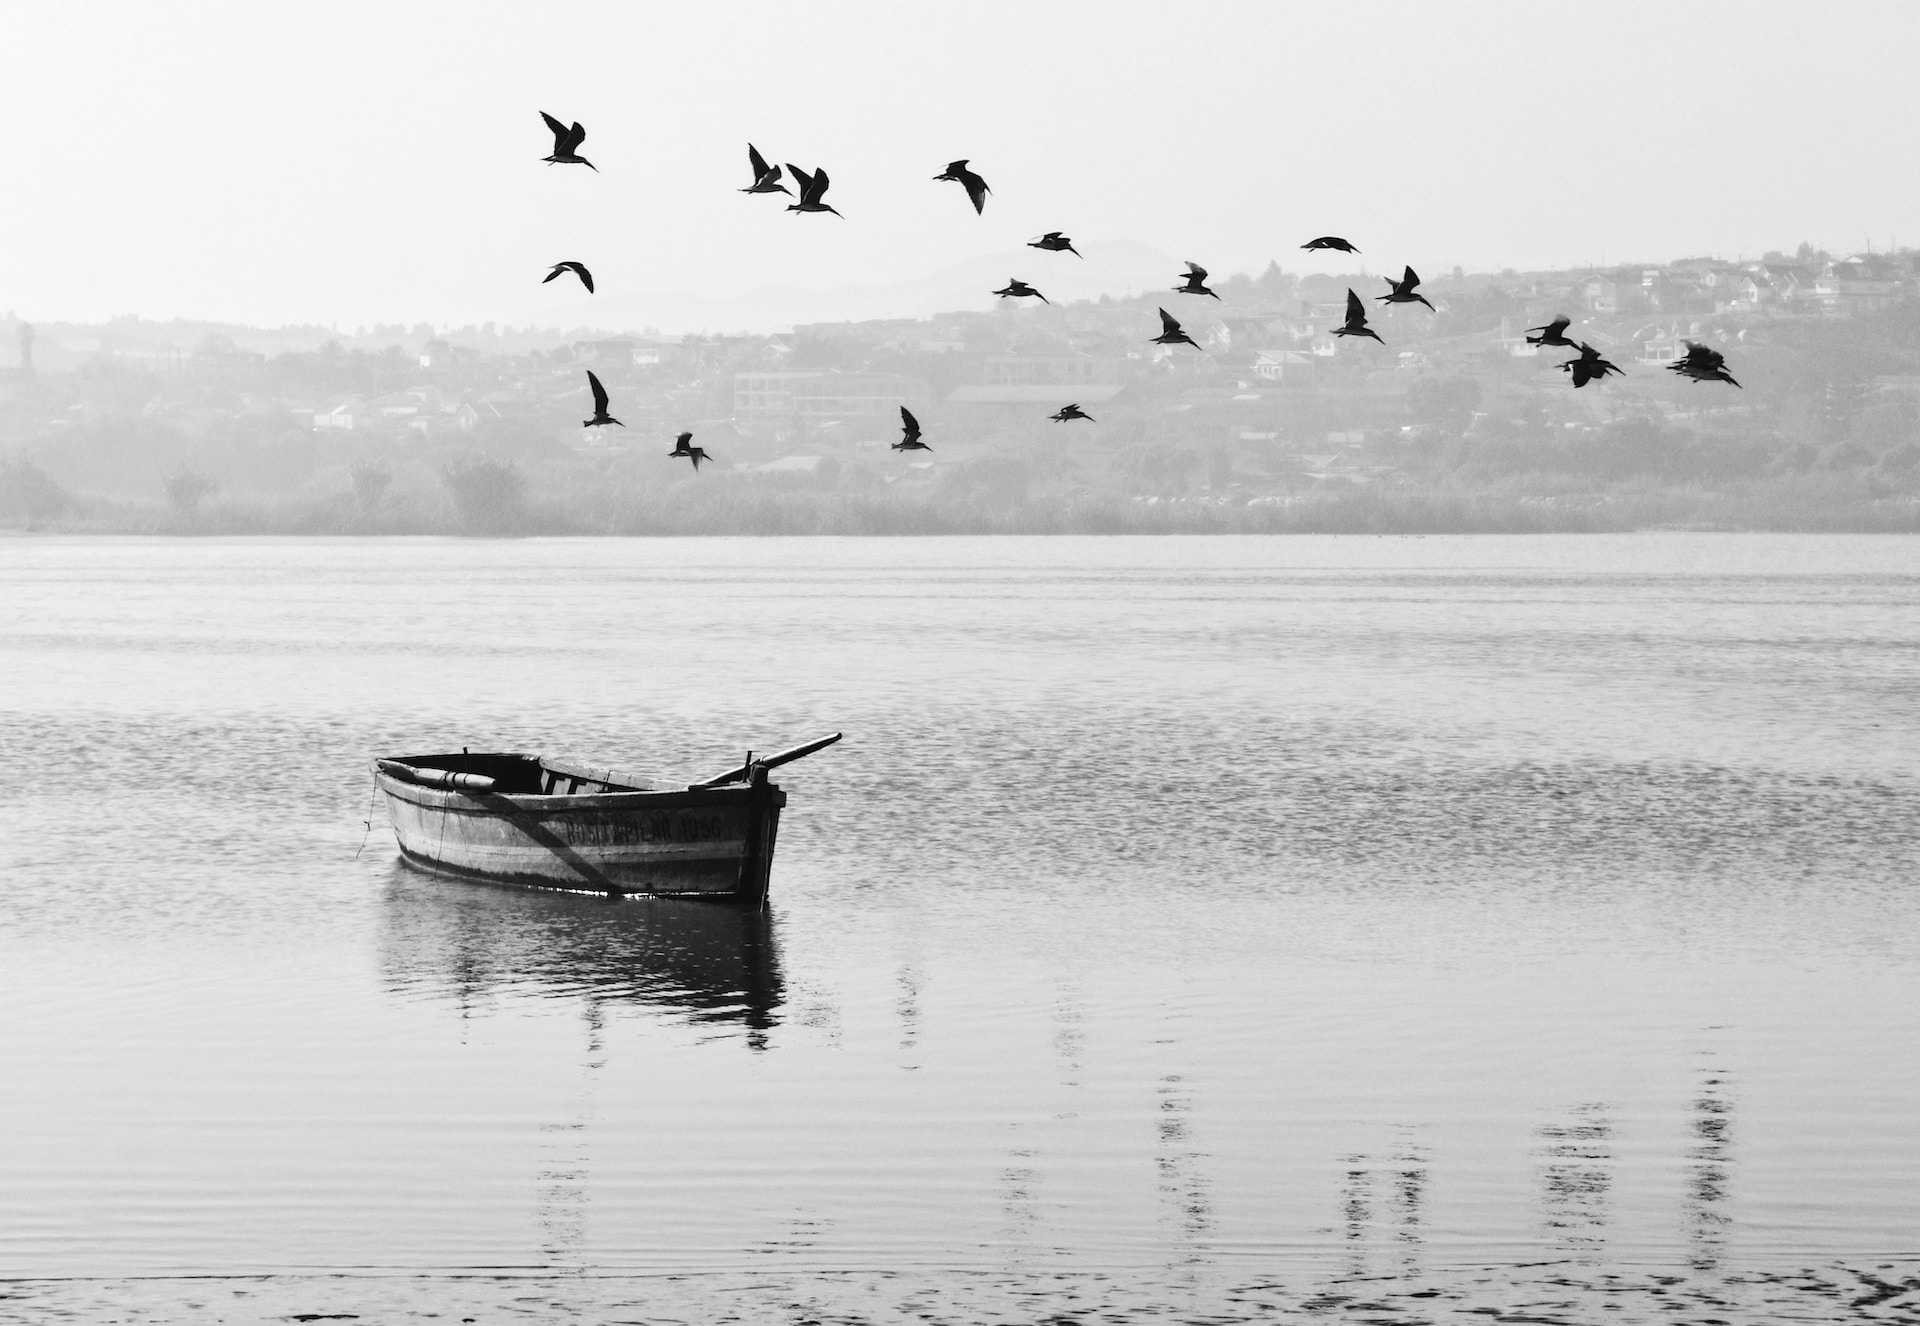 Flock of birds fly above lonely boat on lake